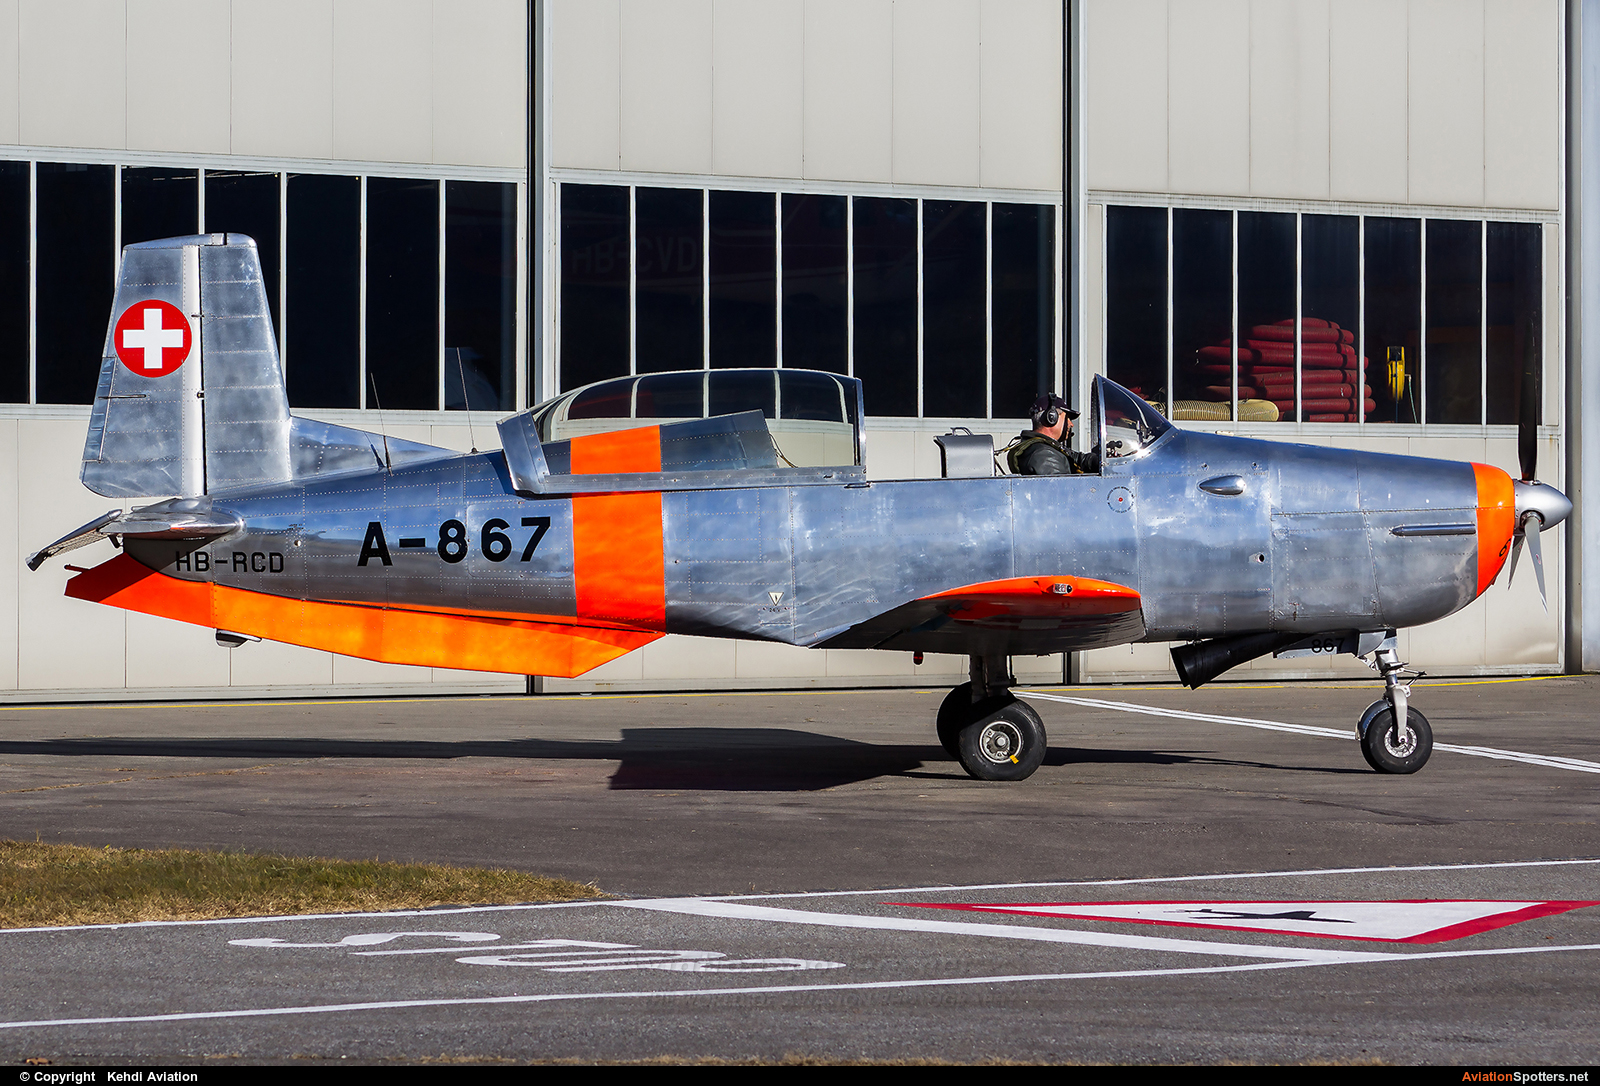 P3 Flyers Ticino  -  P-3  (HB-RCD) By Kehdi Aviation (Kehdi Aviation)